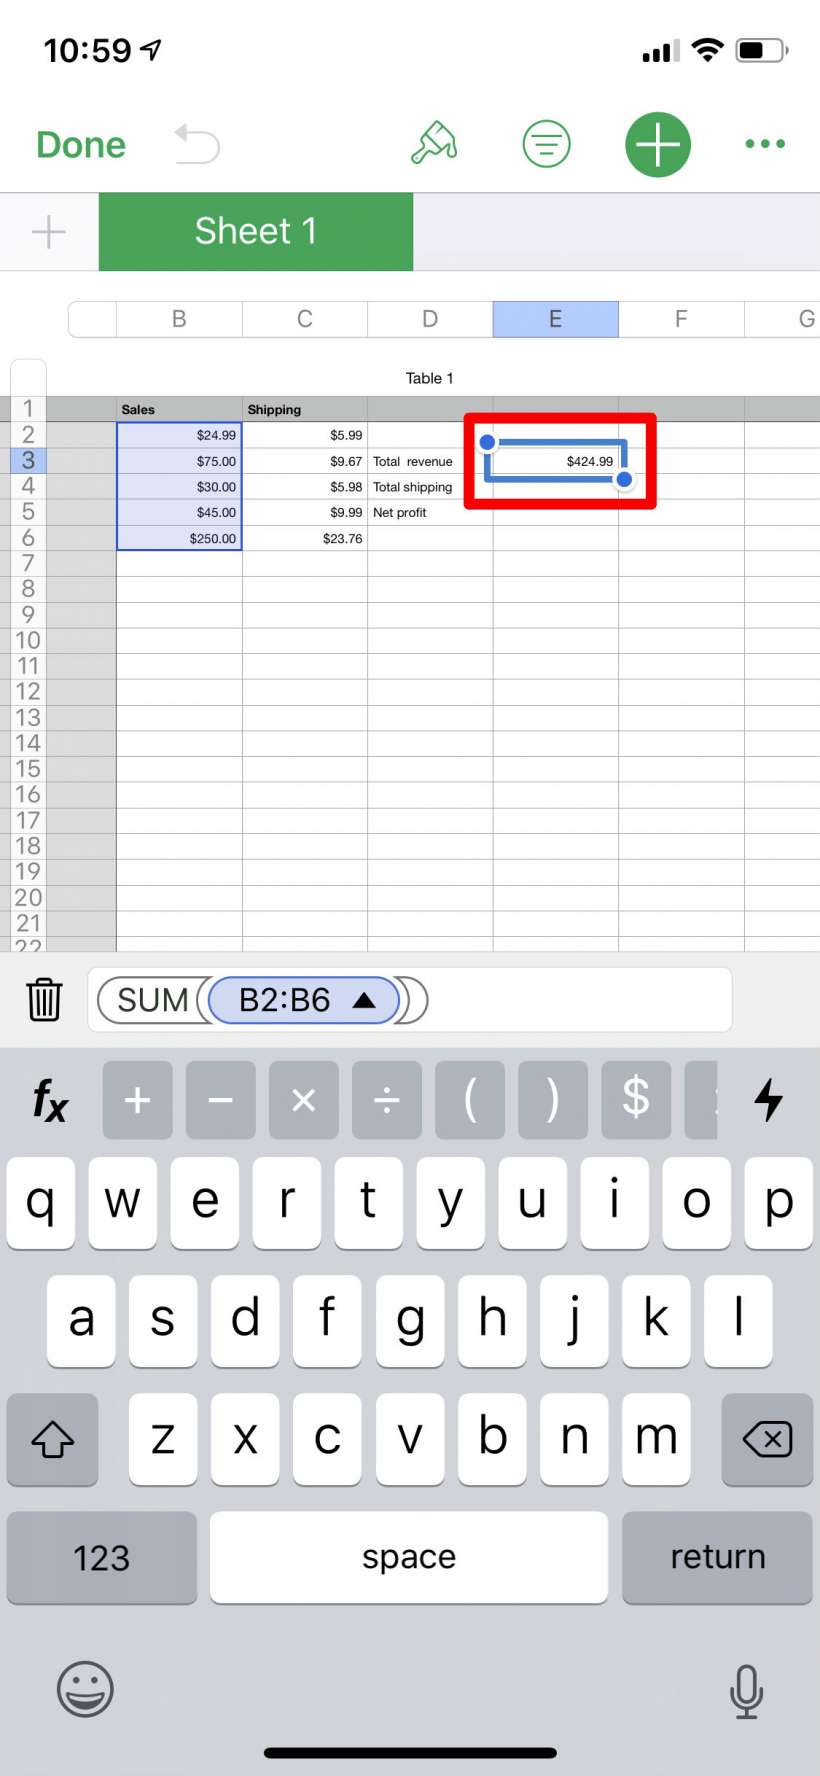 How to use formulas and functions in Numbers spreadsheets on iPhone and iPad.